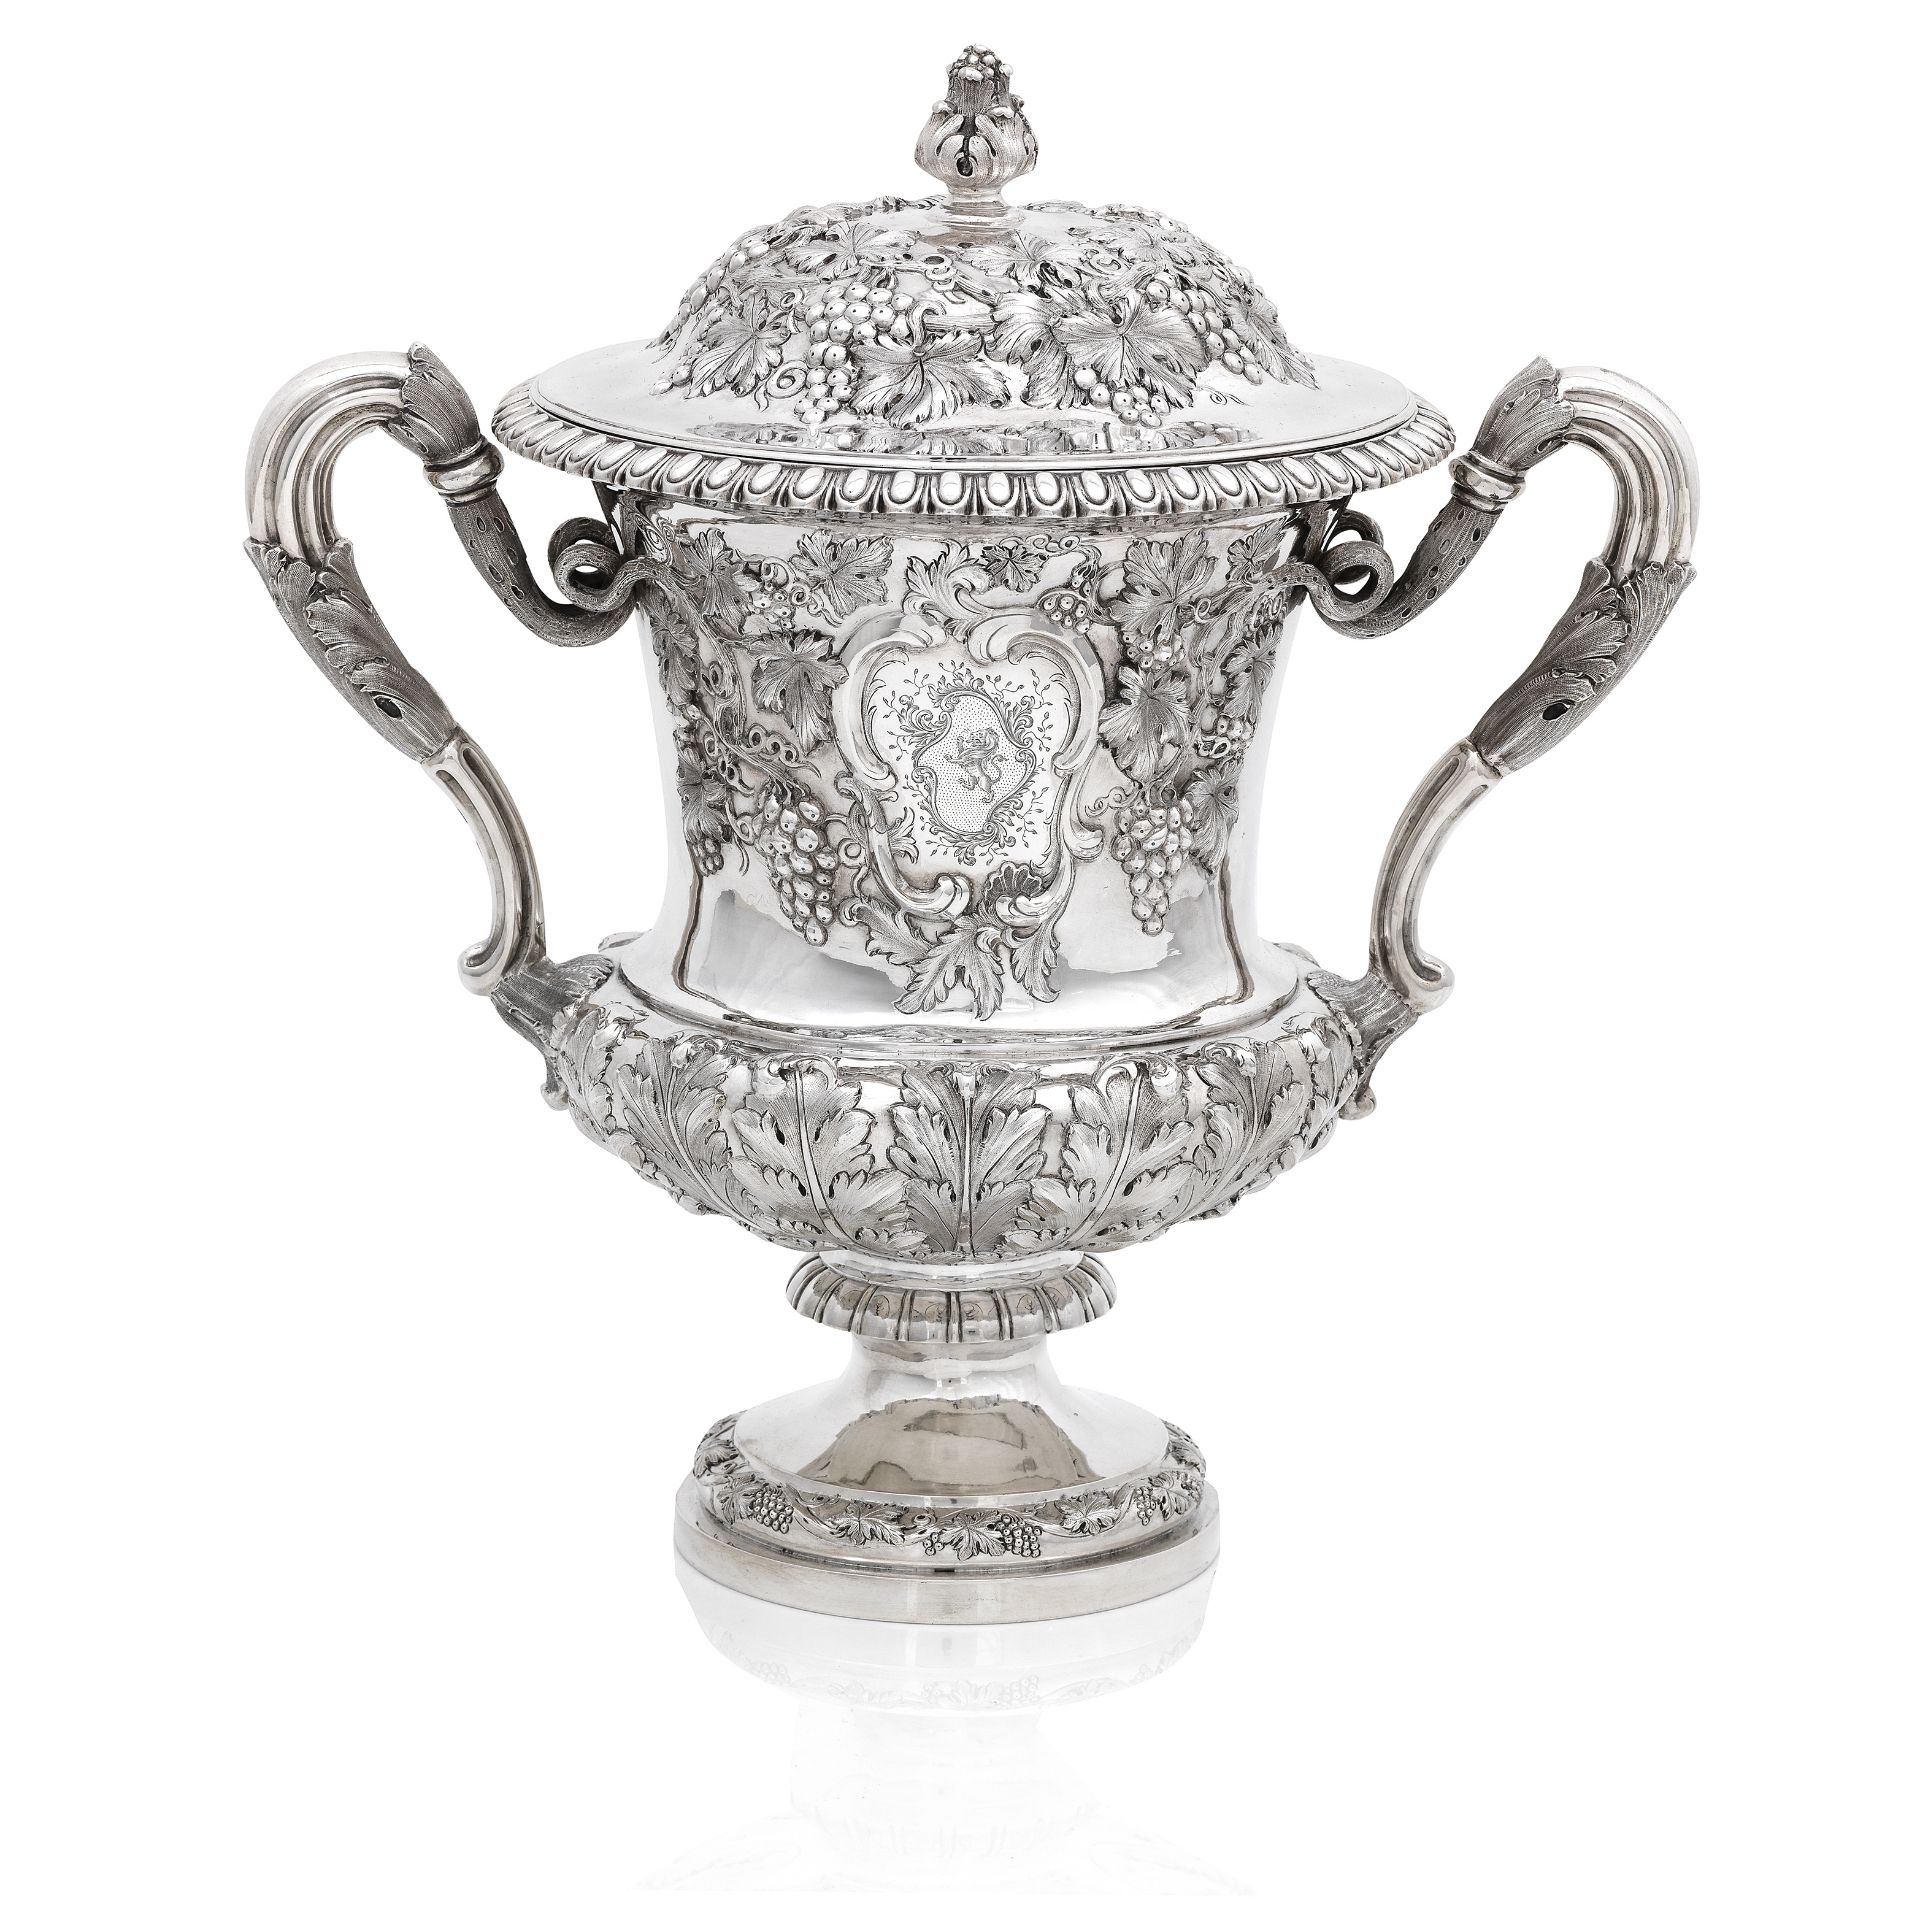 An impressive Victorian silver wine cooler with lid by Marshall & Sons, Edinburgh 1842